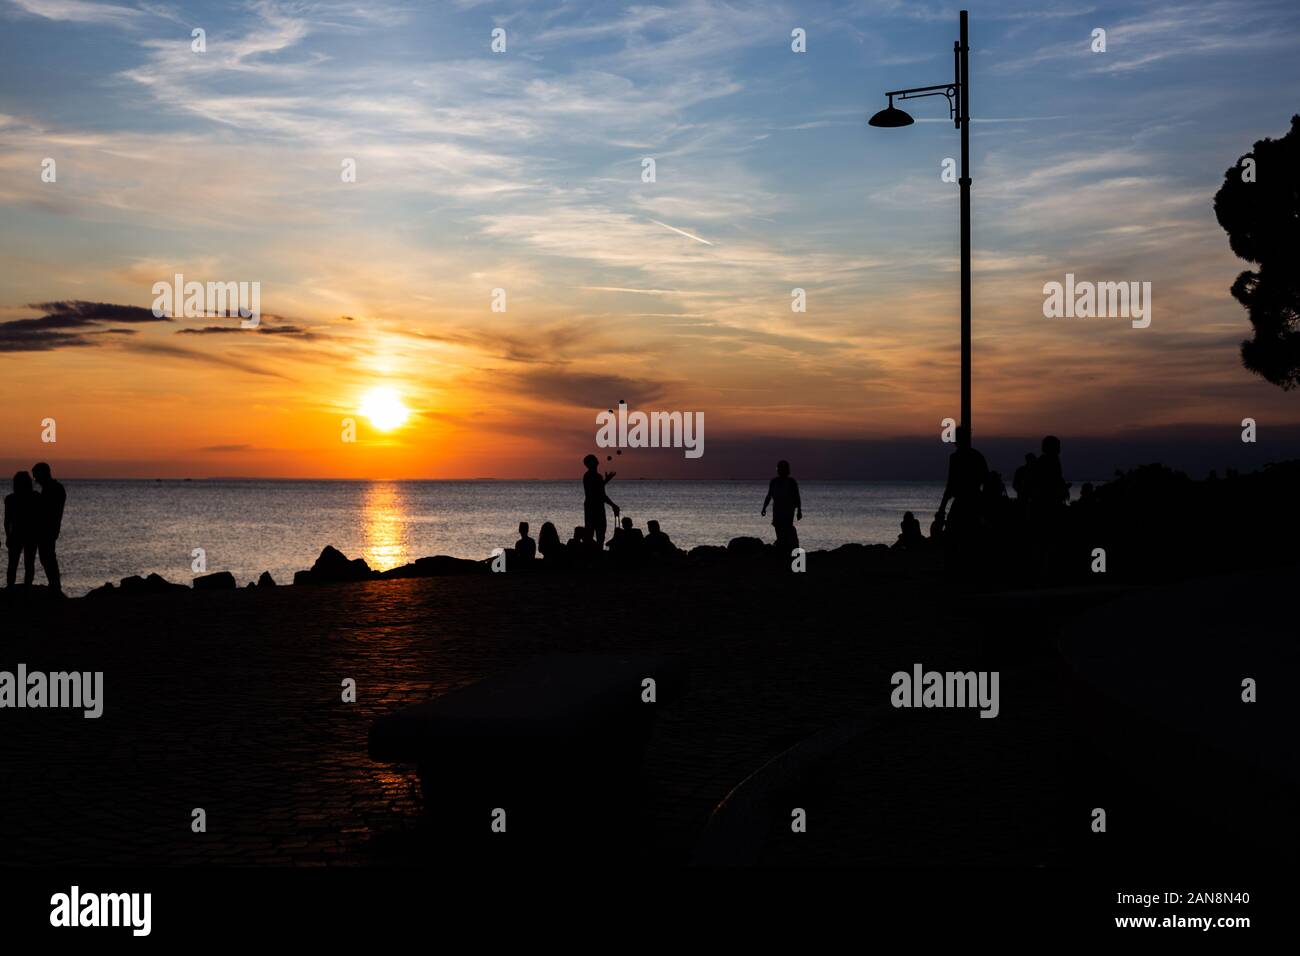 Dramatic and beautiful sunset at the coast line of the mediterranean sea in trieste Italy with silhouettes of a couple and people sitting on the beach Stock Photo